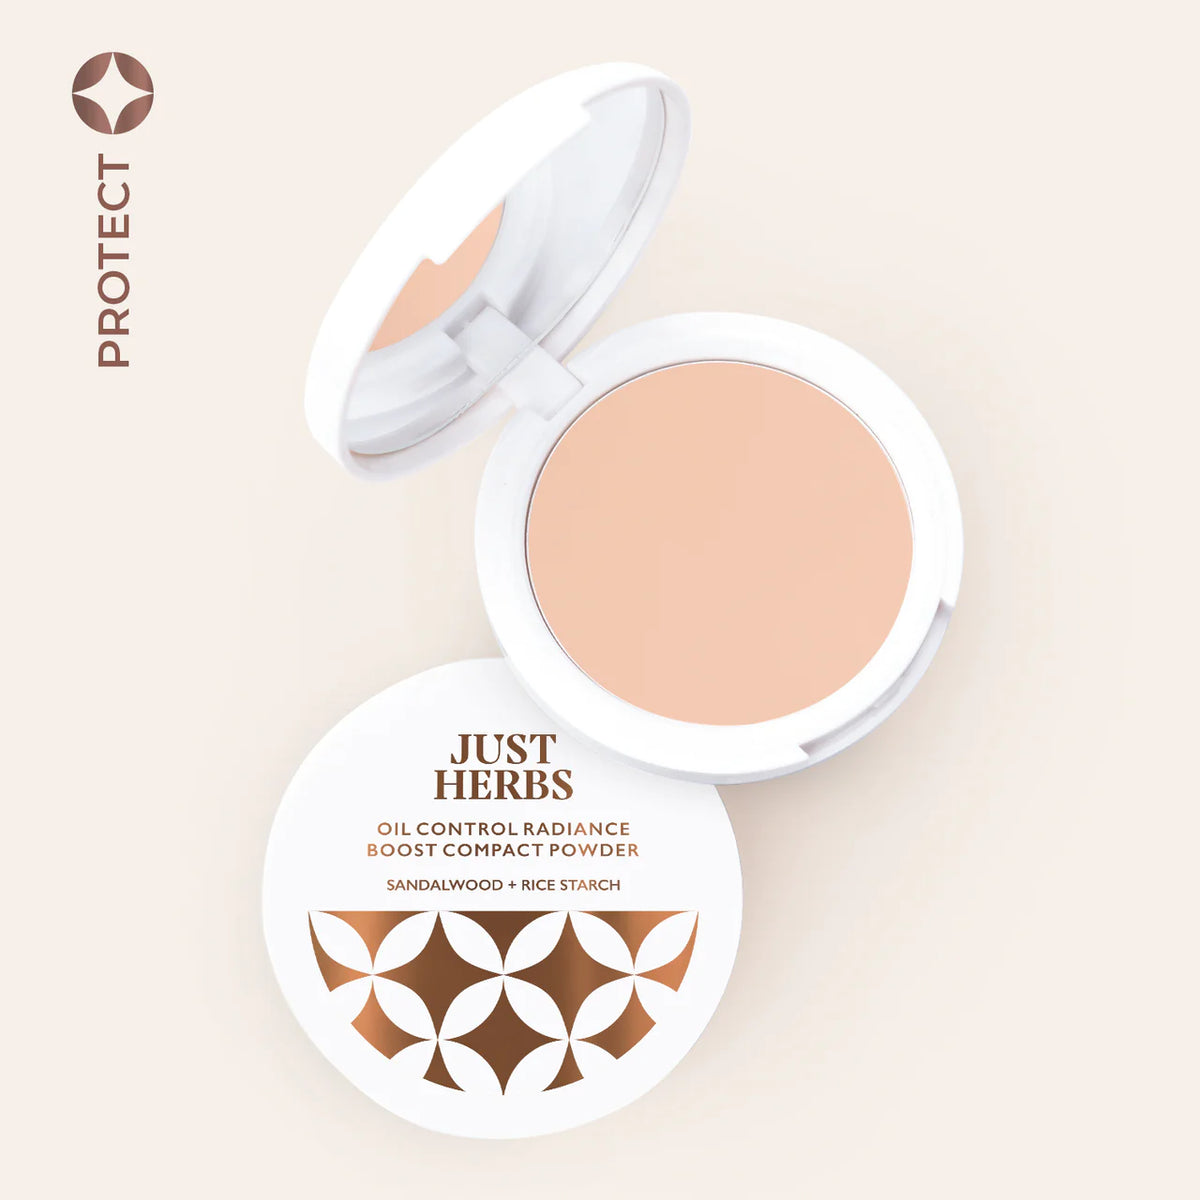 Just Herb Oil Control Radiance Boost Compact Powder with Sandalwood & Rice Starch